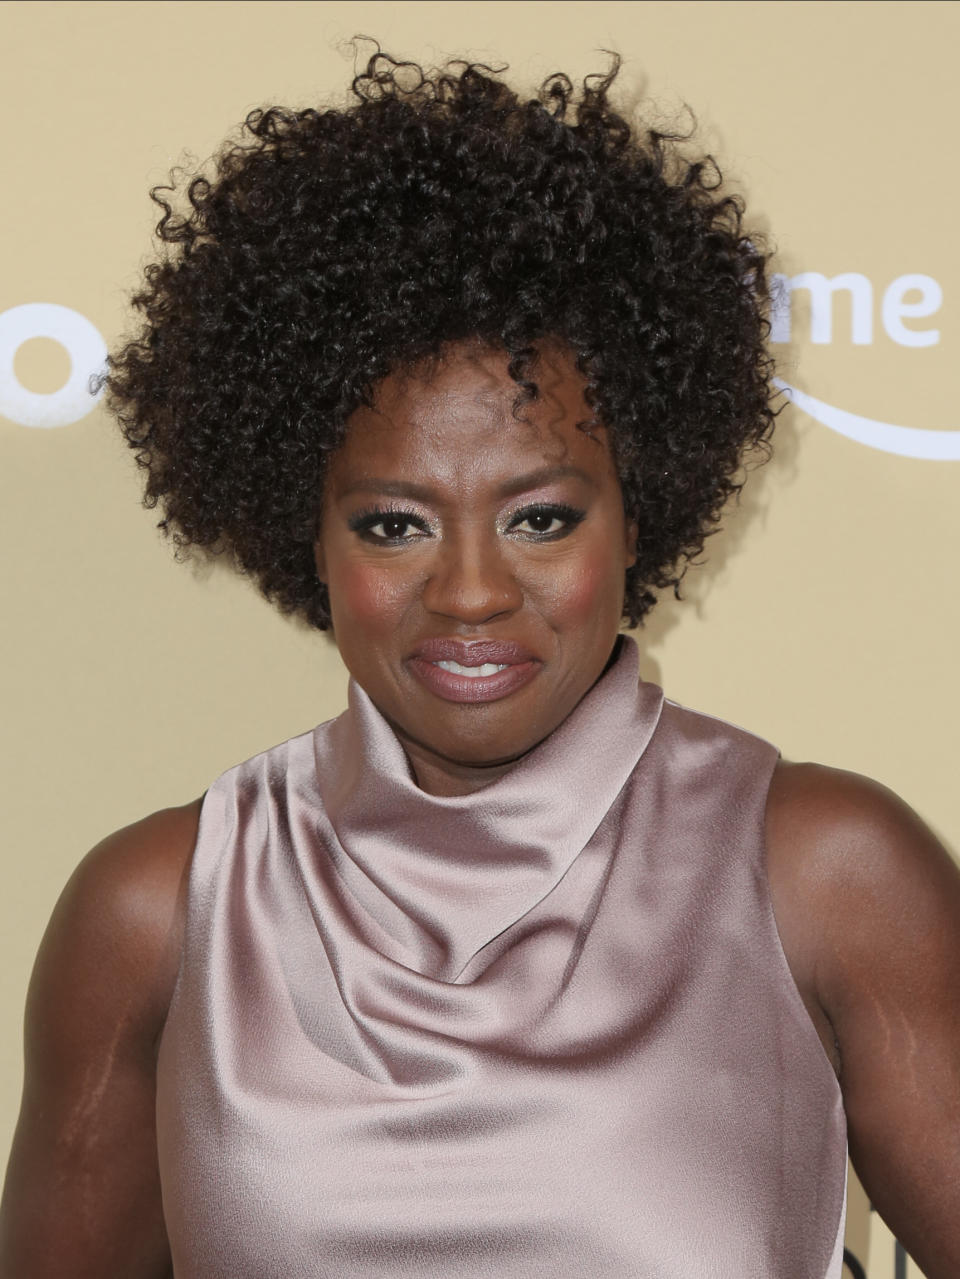 Viola Davis at the Amazon Studios Troop Zero Los Angeles Premiere held at the Pacific Theatres at The Grove on January 13, 2020 in Los Angeles, CA, USA (Photo by JC Olivera/Sipa USA)